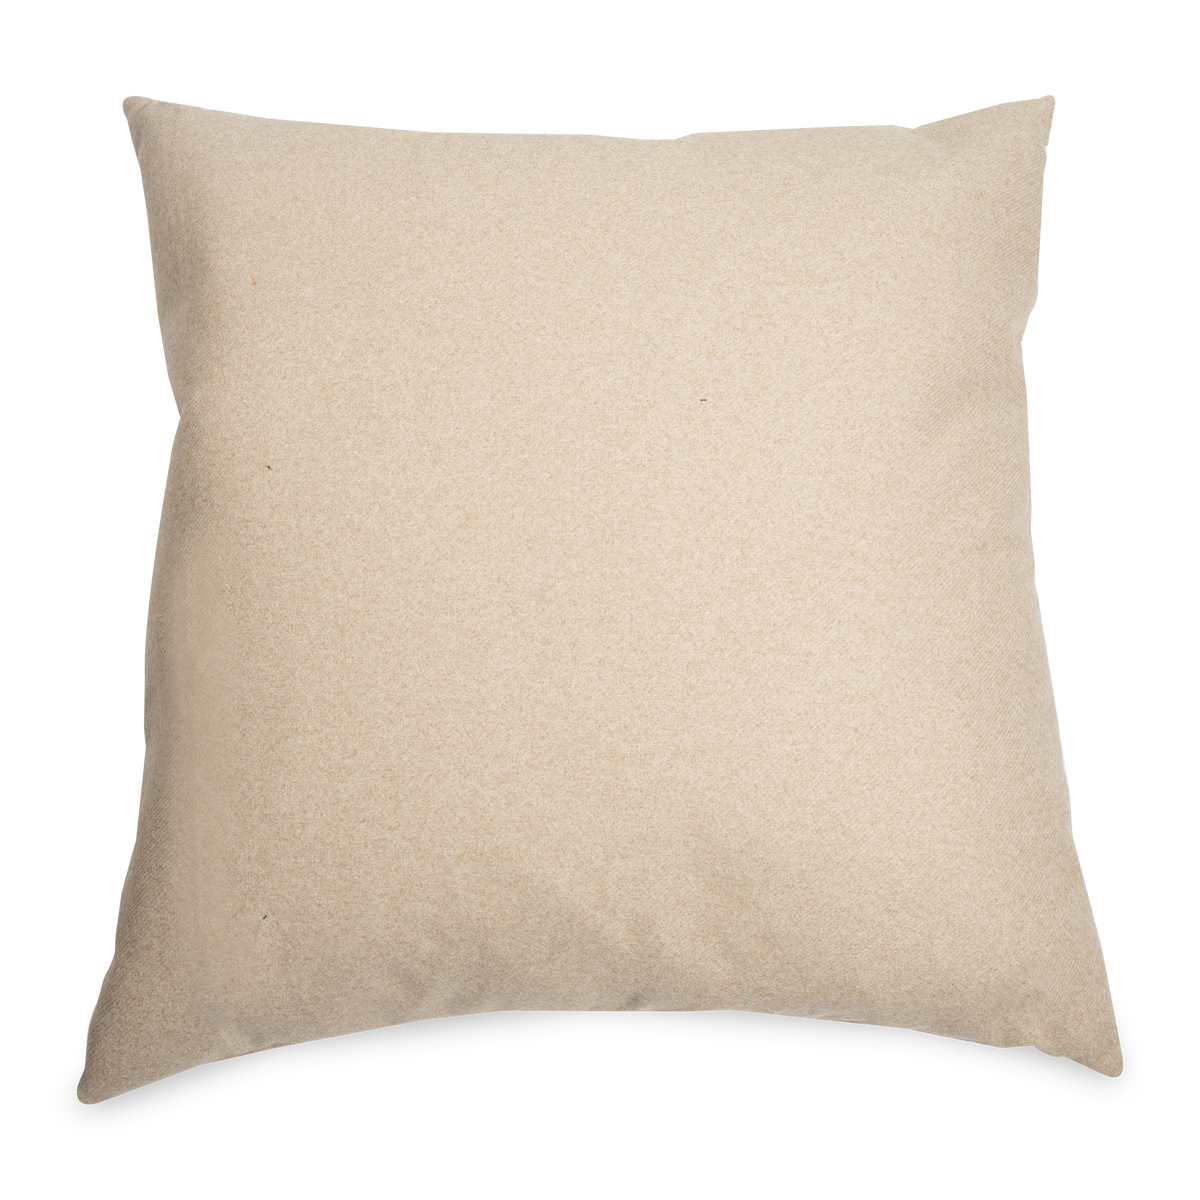 The Barrett Pillow in fawn is simple in design but rich in colour featuring a clean knife edge finish.